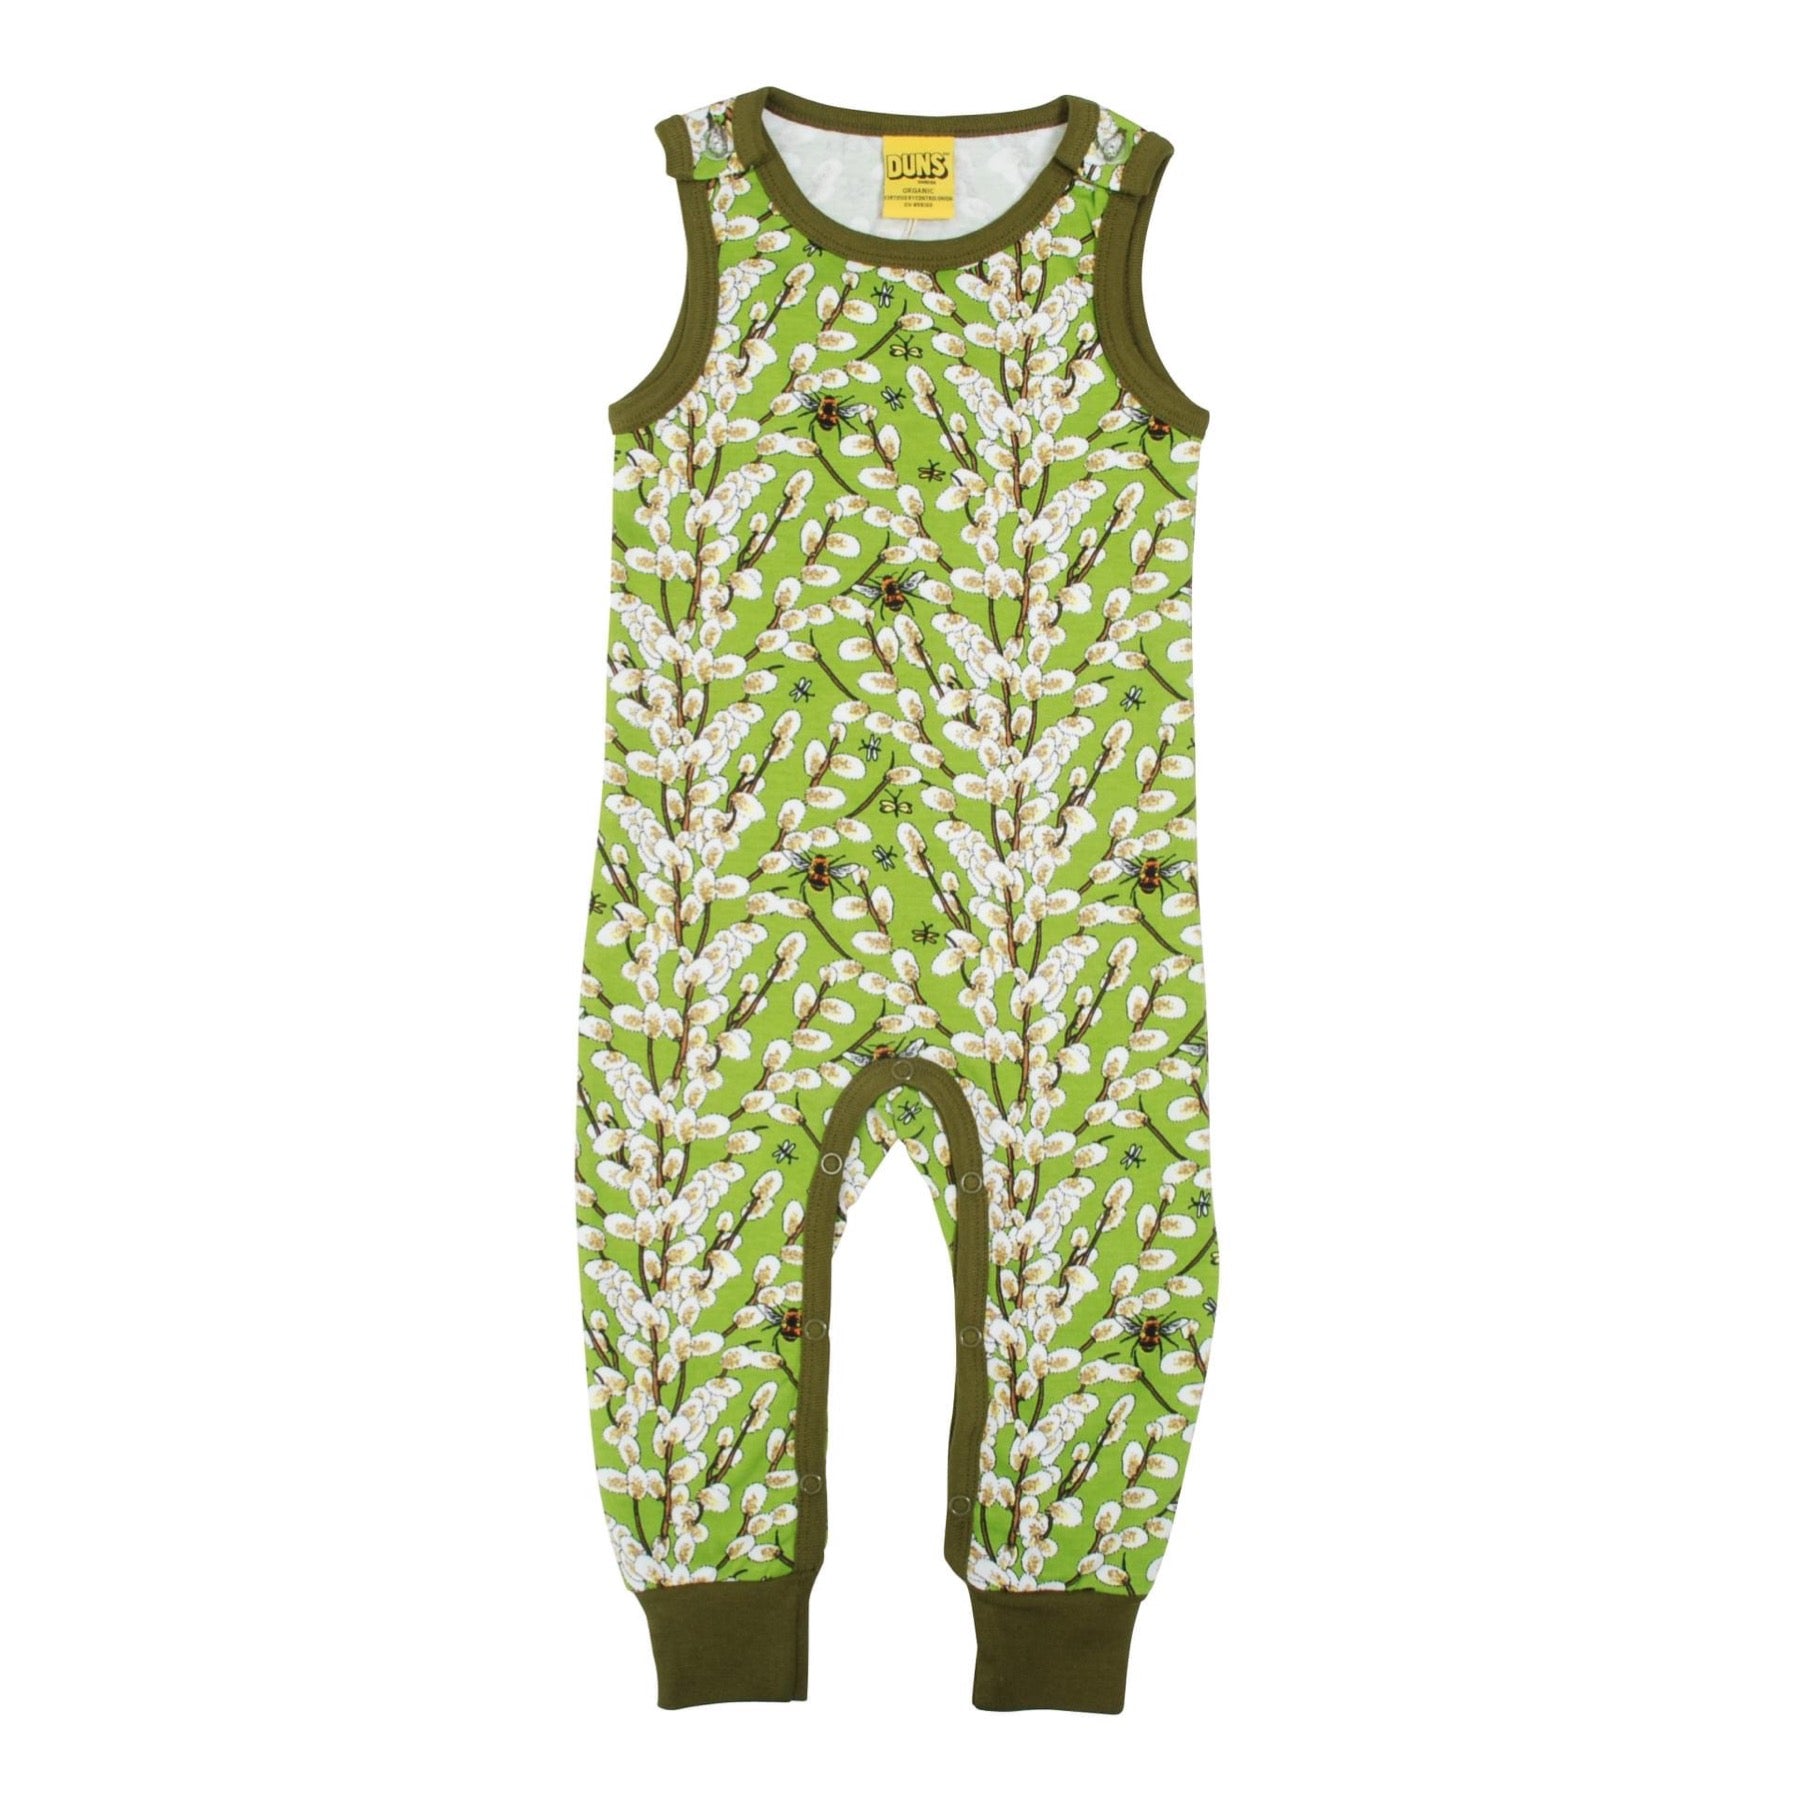 DUNS Sweden Dungarees Goat Willow Greenery